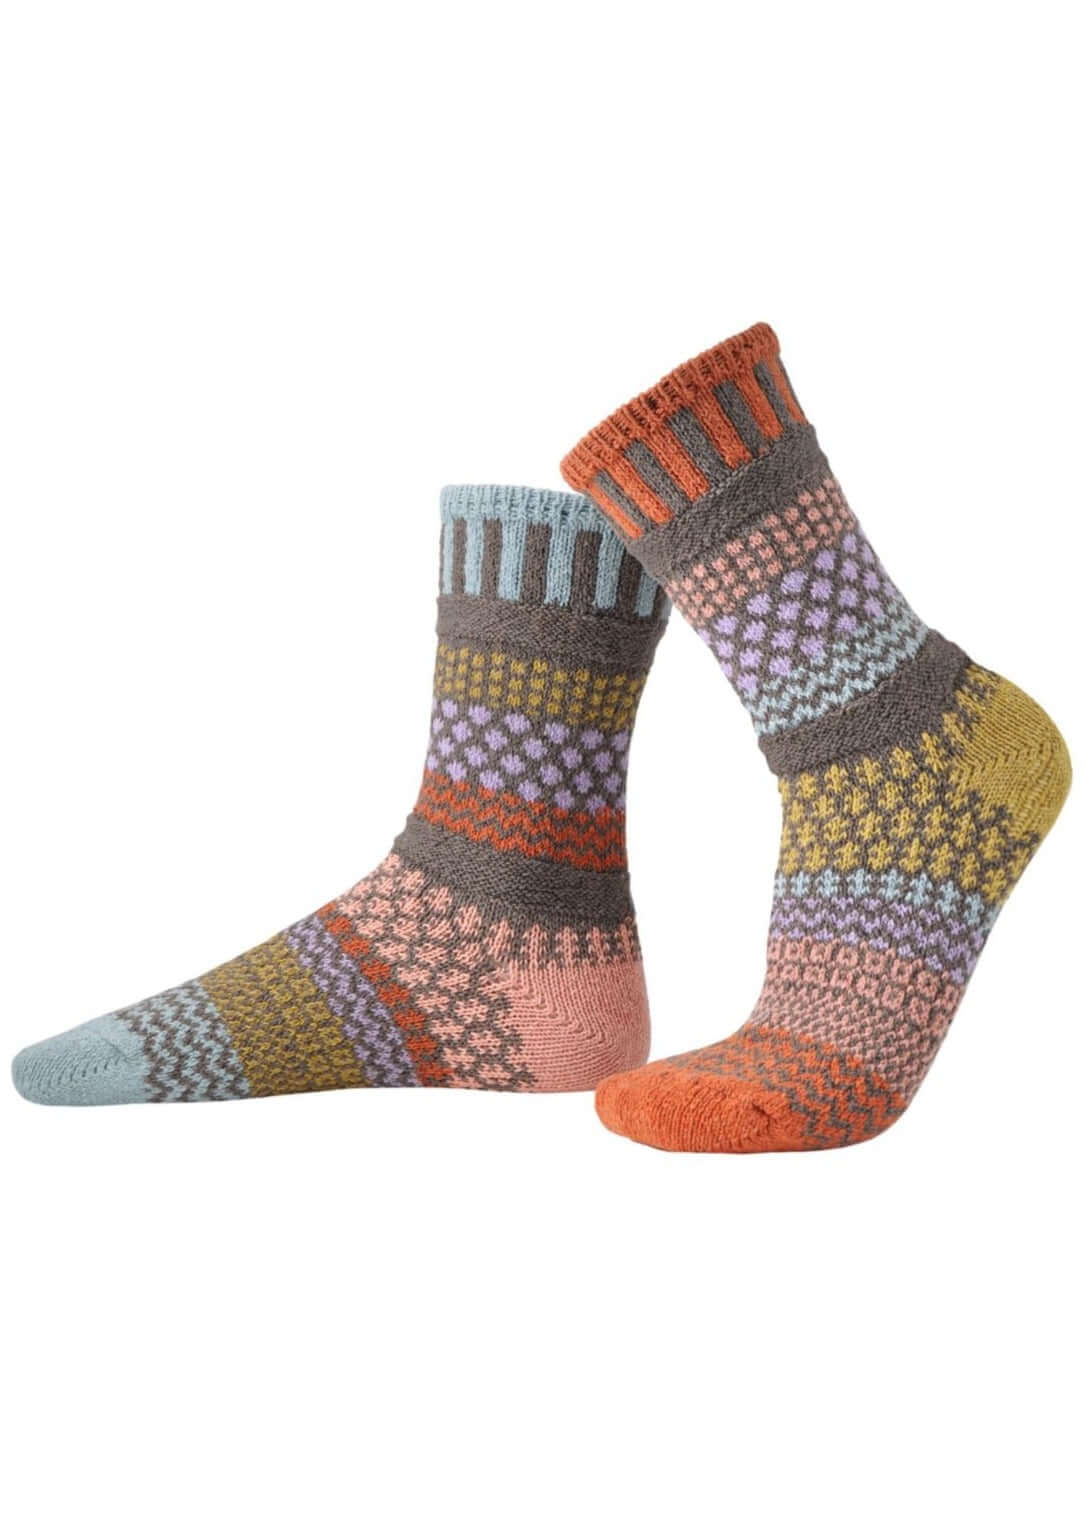 Solmate OLIVE Knitted Crew Socks Proudly Made USA | These socks are delightfully mismatched & so very comfortable.  Classy Cozy Cool Women's Boutique